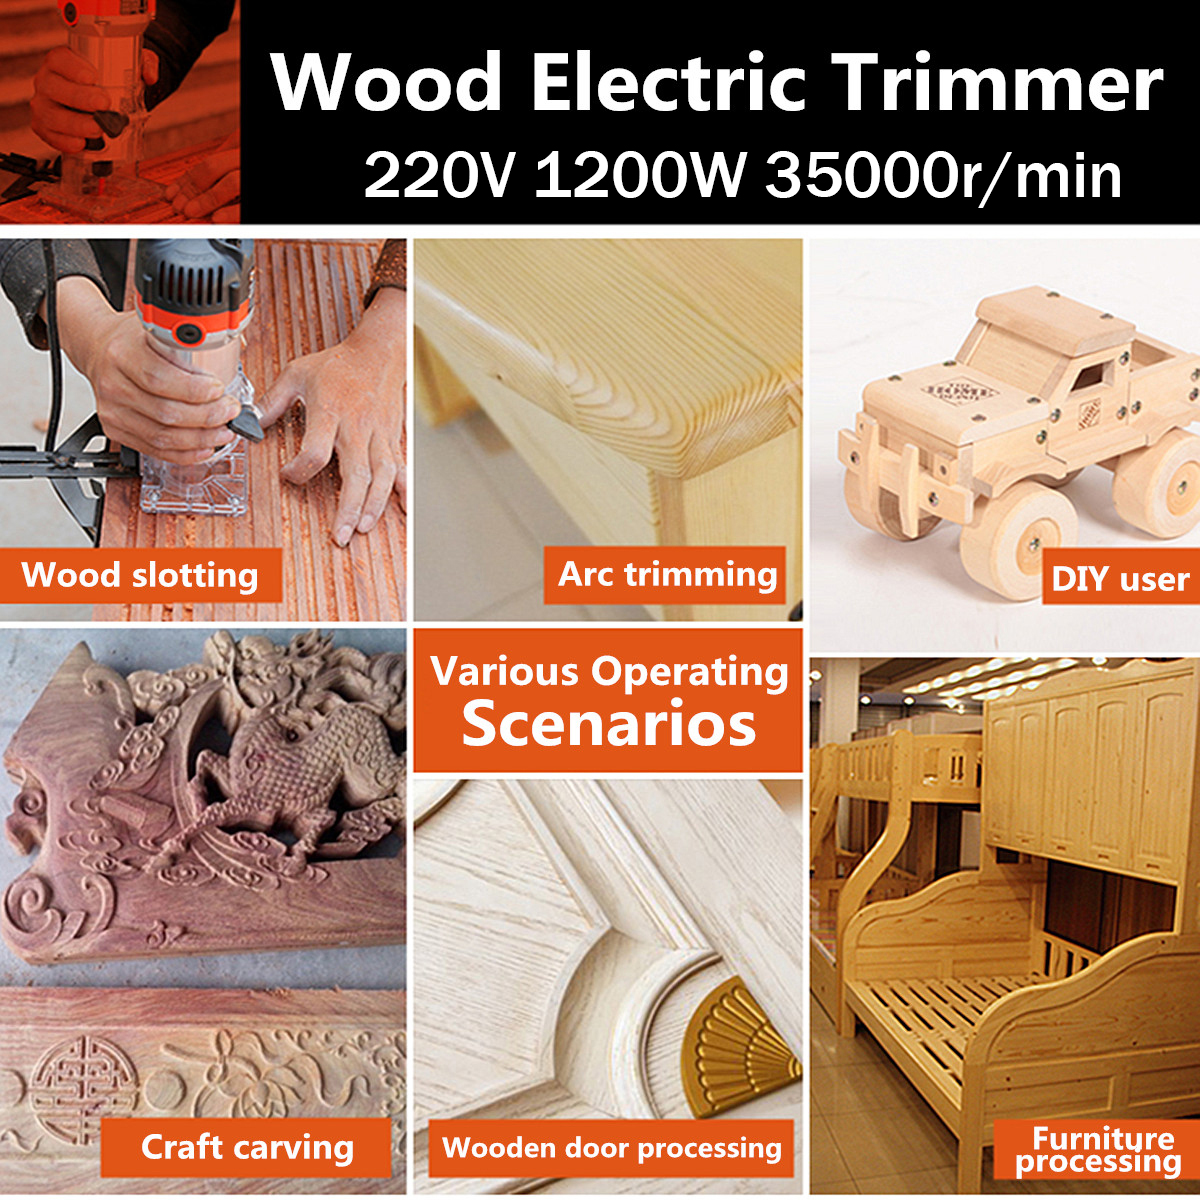 110V220V-1200W-635mm-Wood-Laminate-Palm-Router-Electric-Hand-Trimmer-Edge-Joiners-Woodworking-Tool-1539226-3